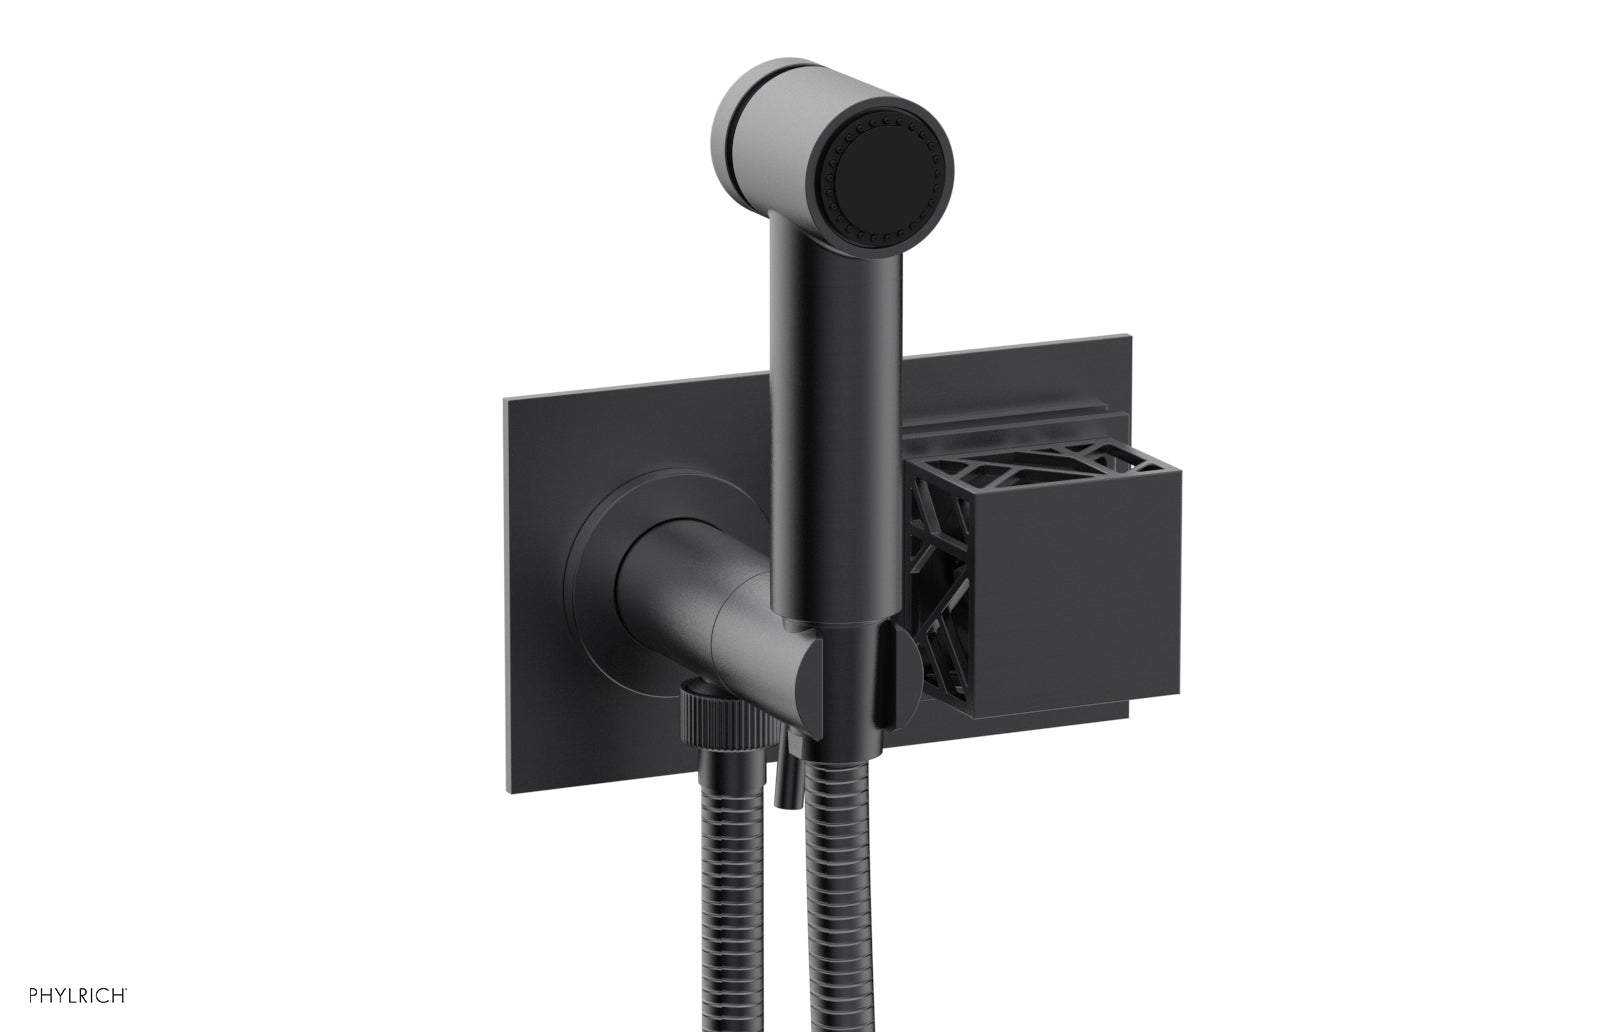 Phylrich JOLIE Wall Mounted Bidet, Square Handle with "Black" Accents